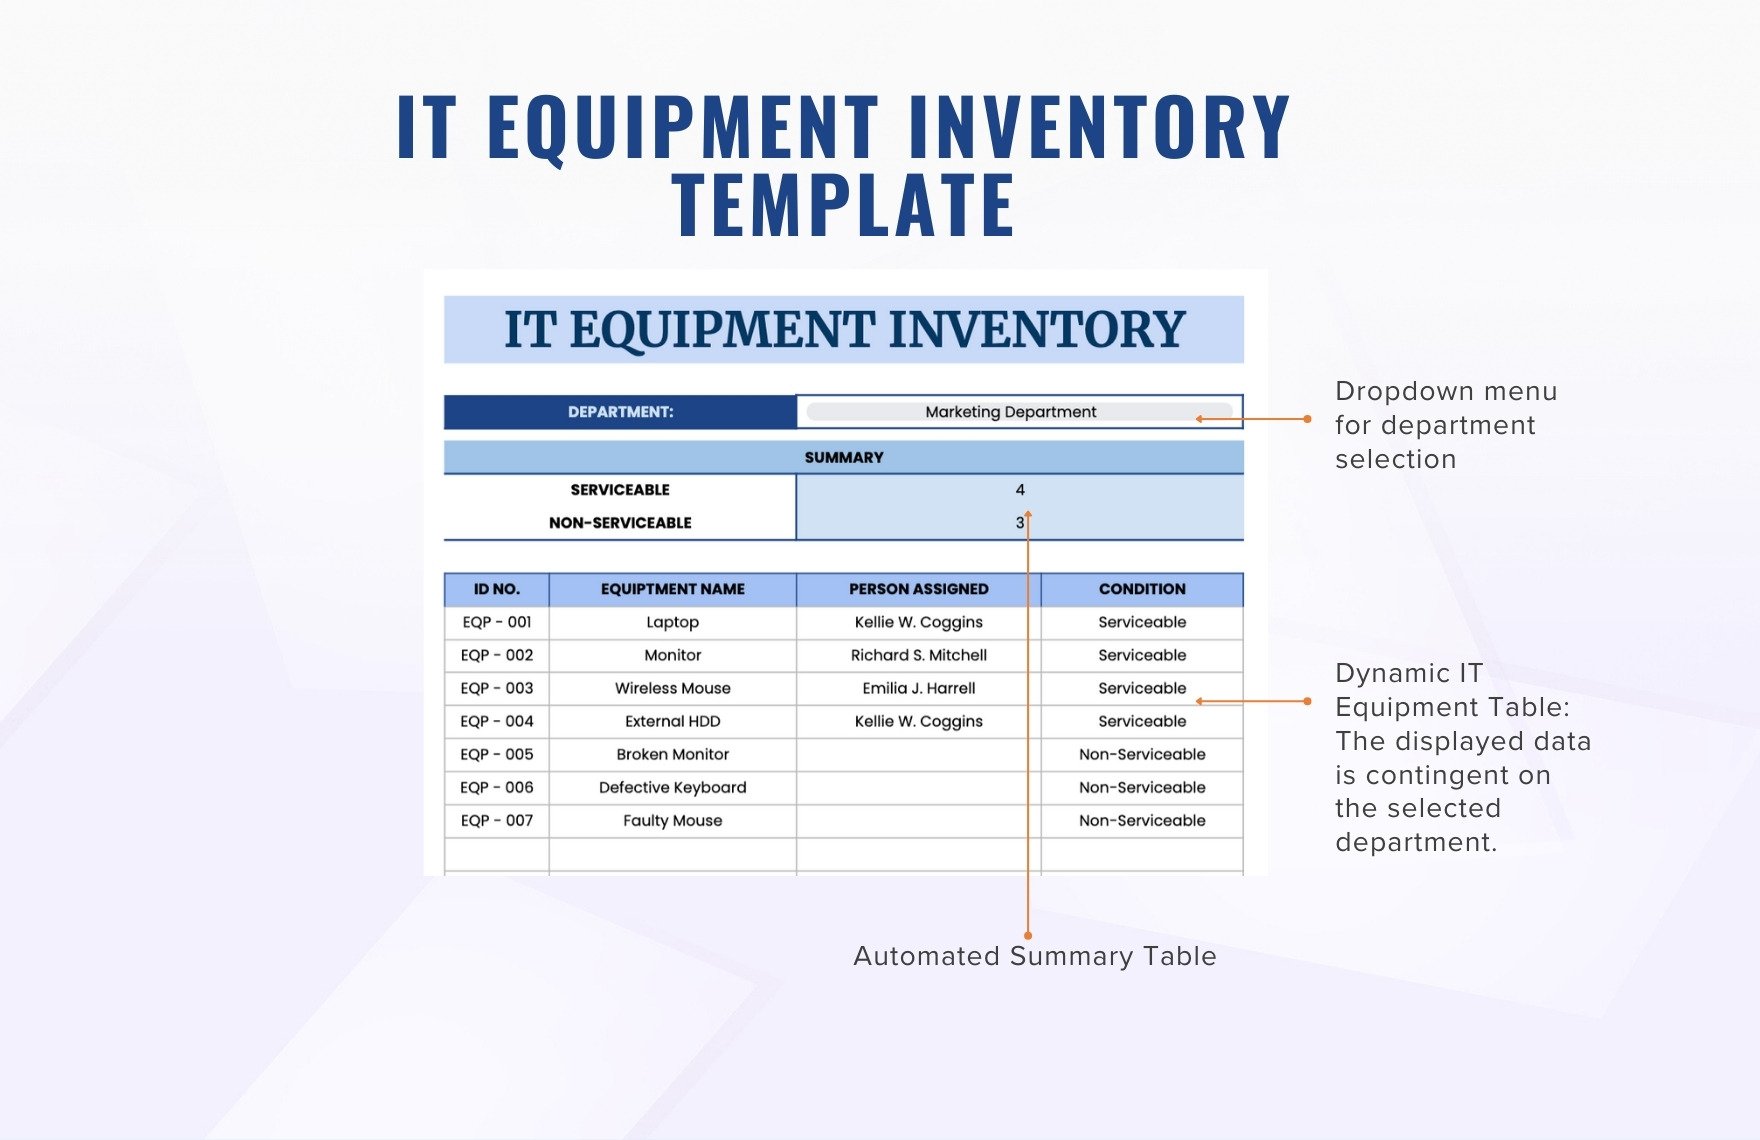 IT Equipment Inventory Template